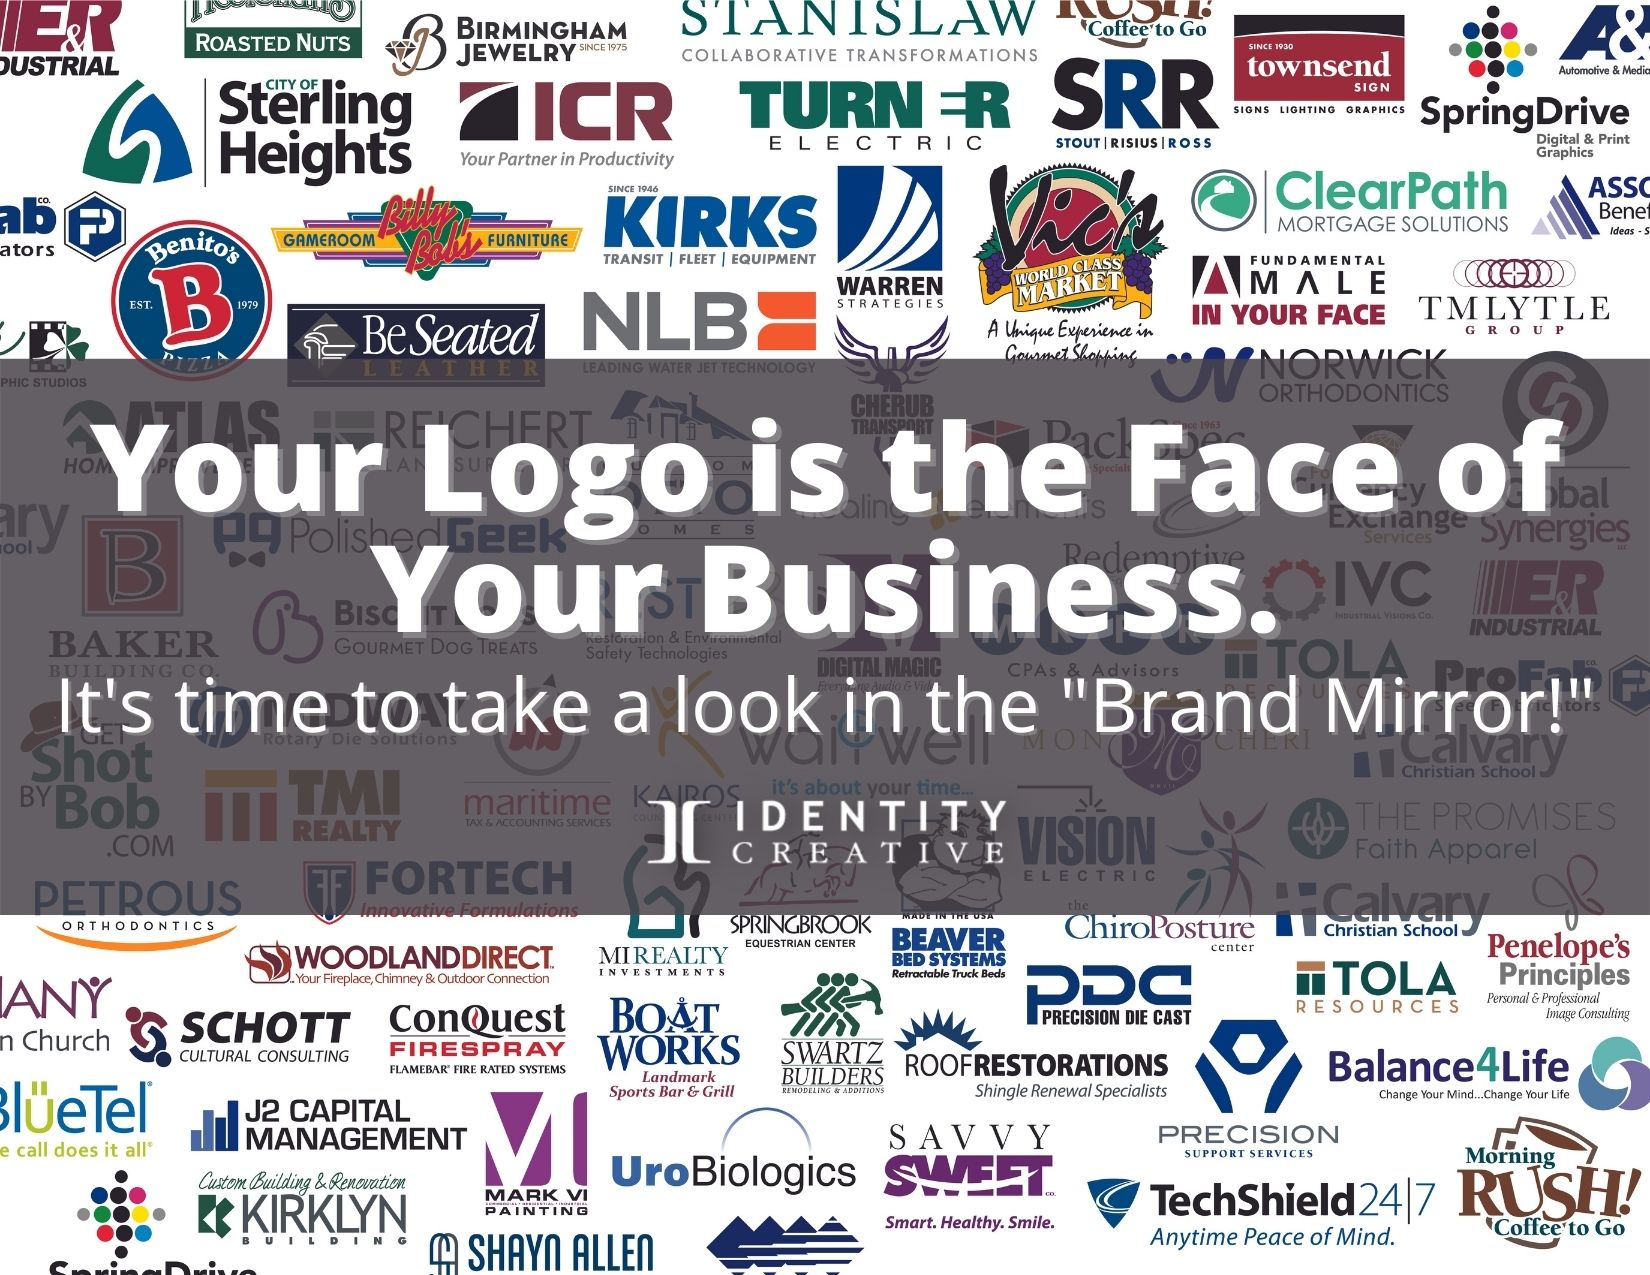 Your logo is Face of the Business